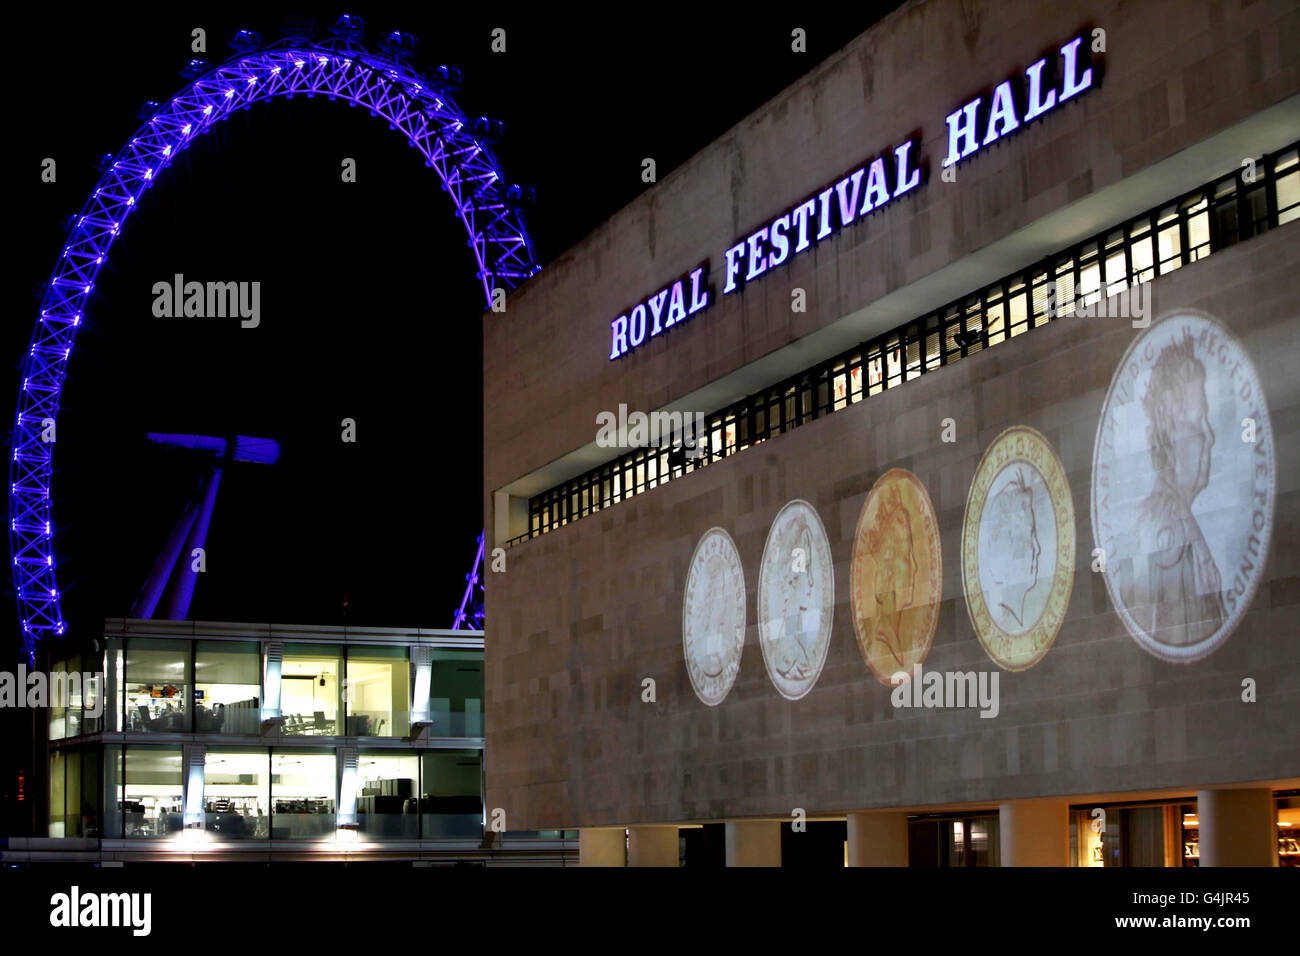 An image of the only official UK 5 coin (right) commemorating The Queen's Diamond Jubilee alongside four coin portraits of The Queen from 1953, 1968, 1985 and 1998, is projected on to the Royal Festival Hall in London. Stock Photo